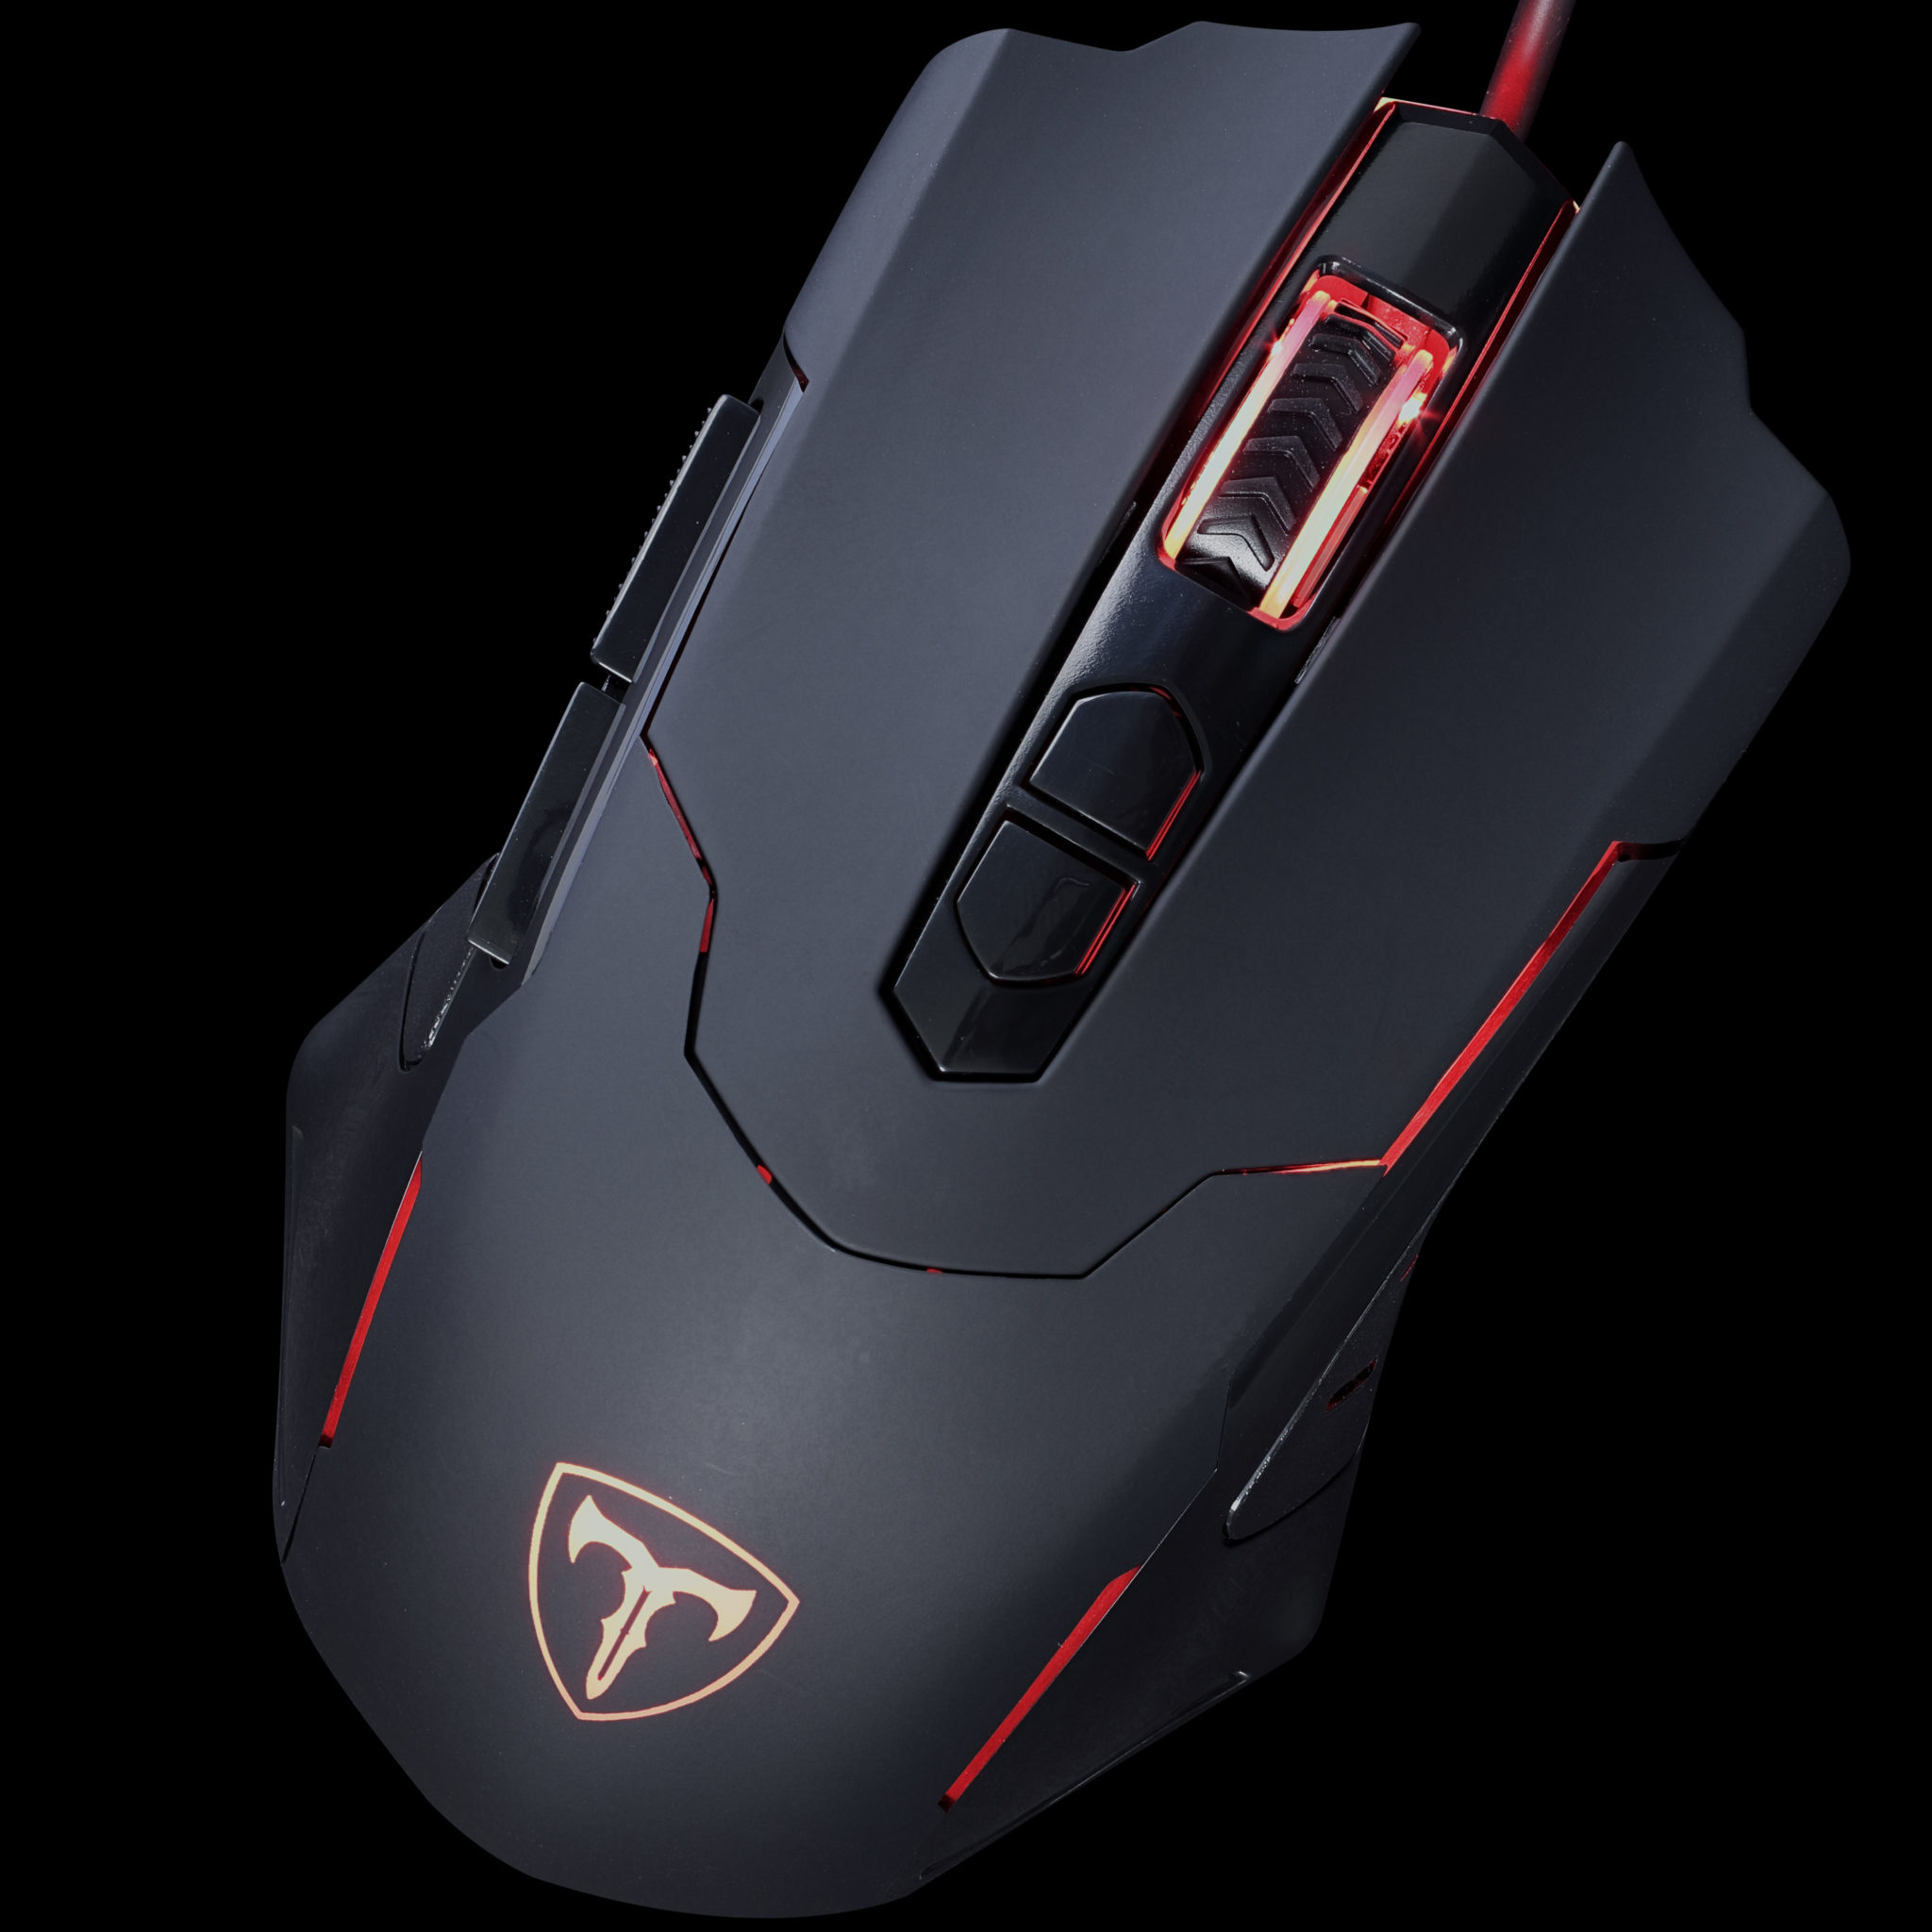 PICTEK T7 Wired Gaming Mouse Top View